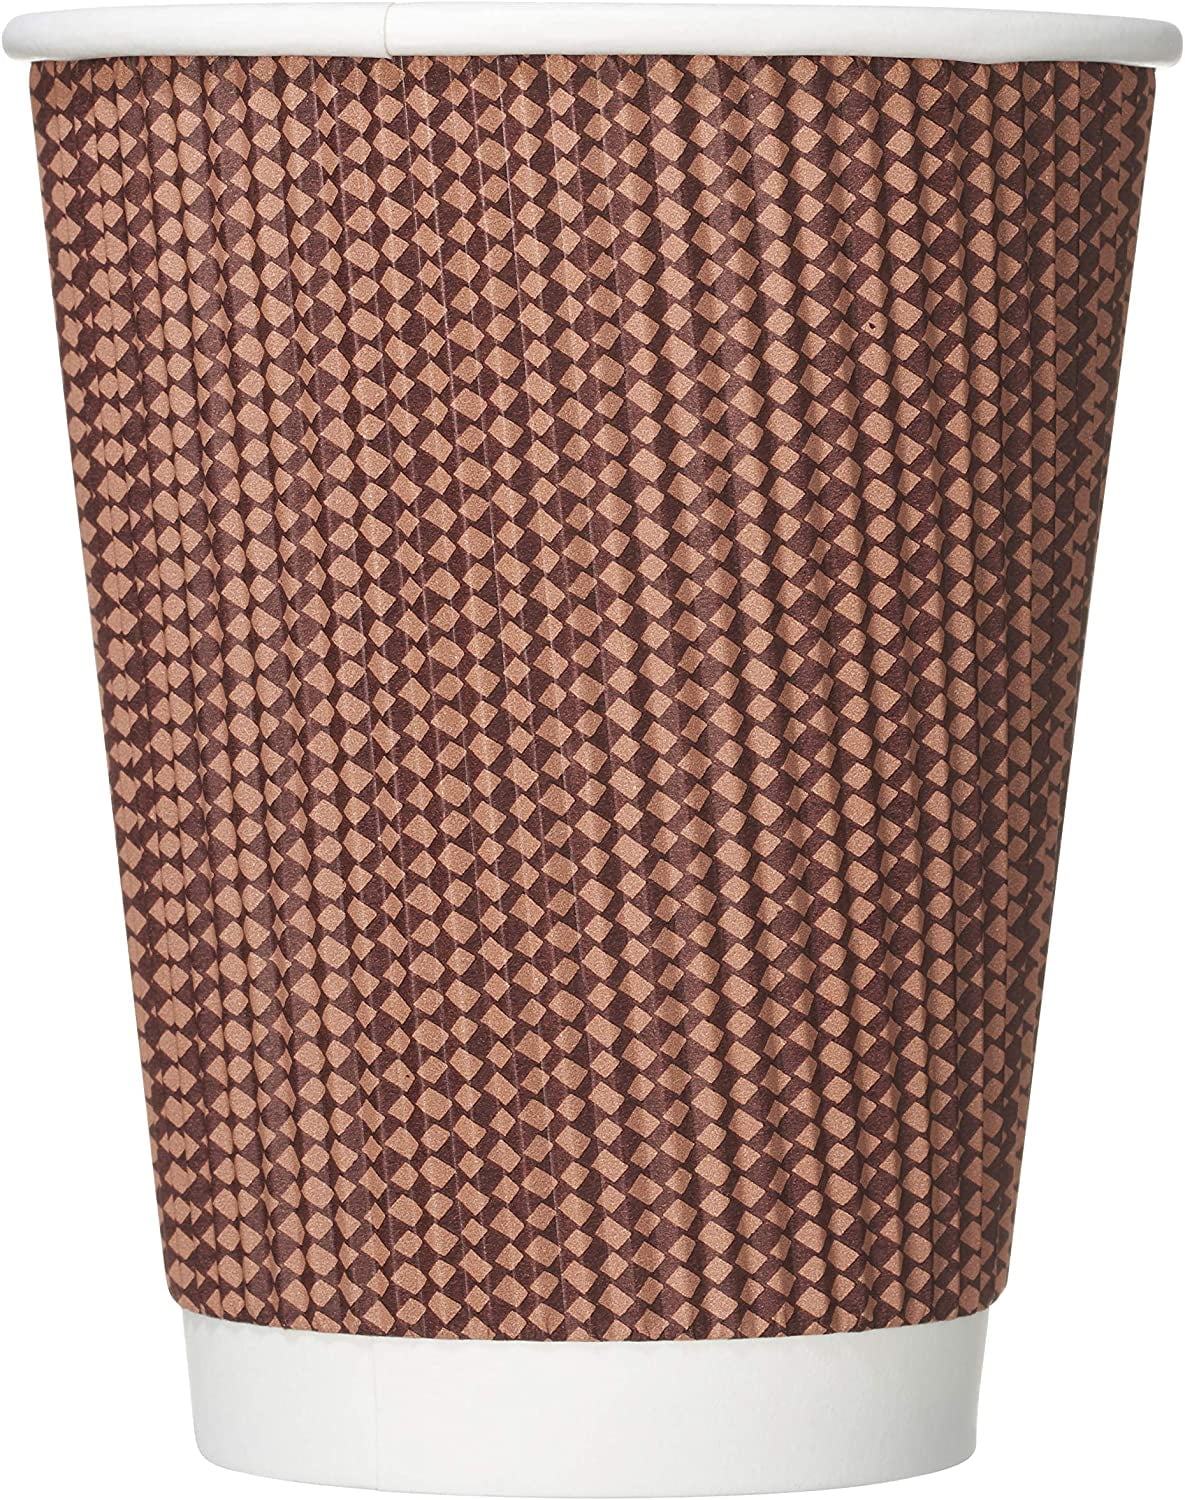 200 PACK 12 oz RippIe Wall Insulated Disposable Paper Coffee Cups 